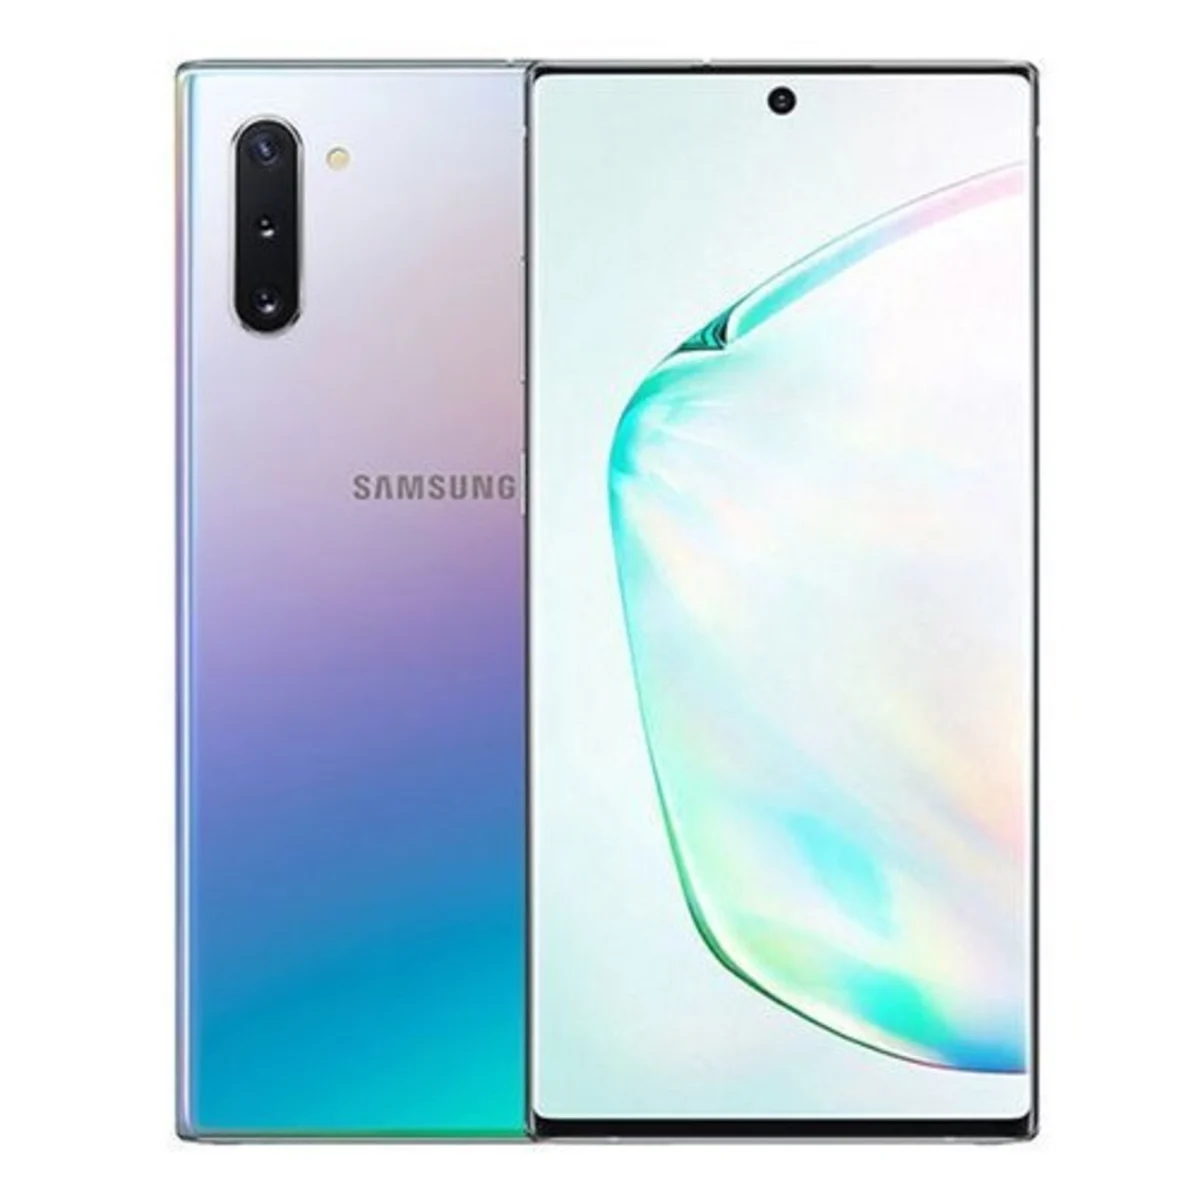 Samsung Galaxy Note 10 Specifications | The Complete Review